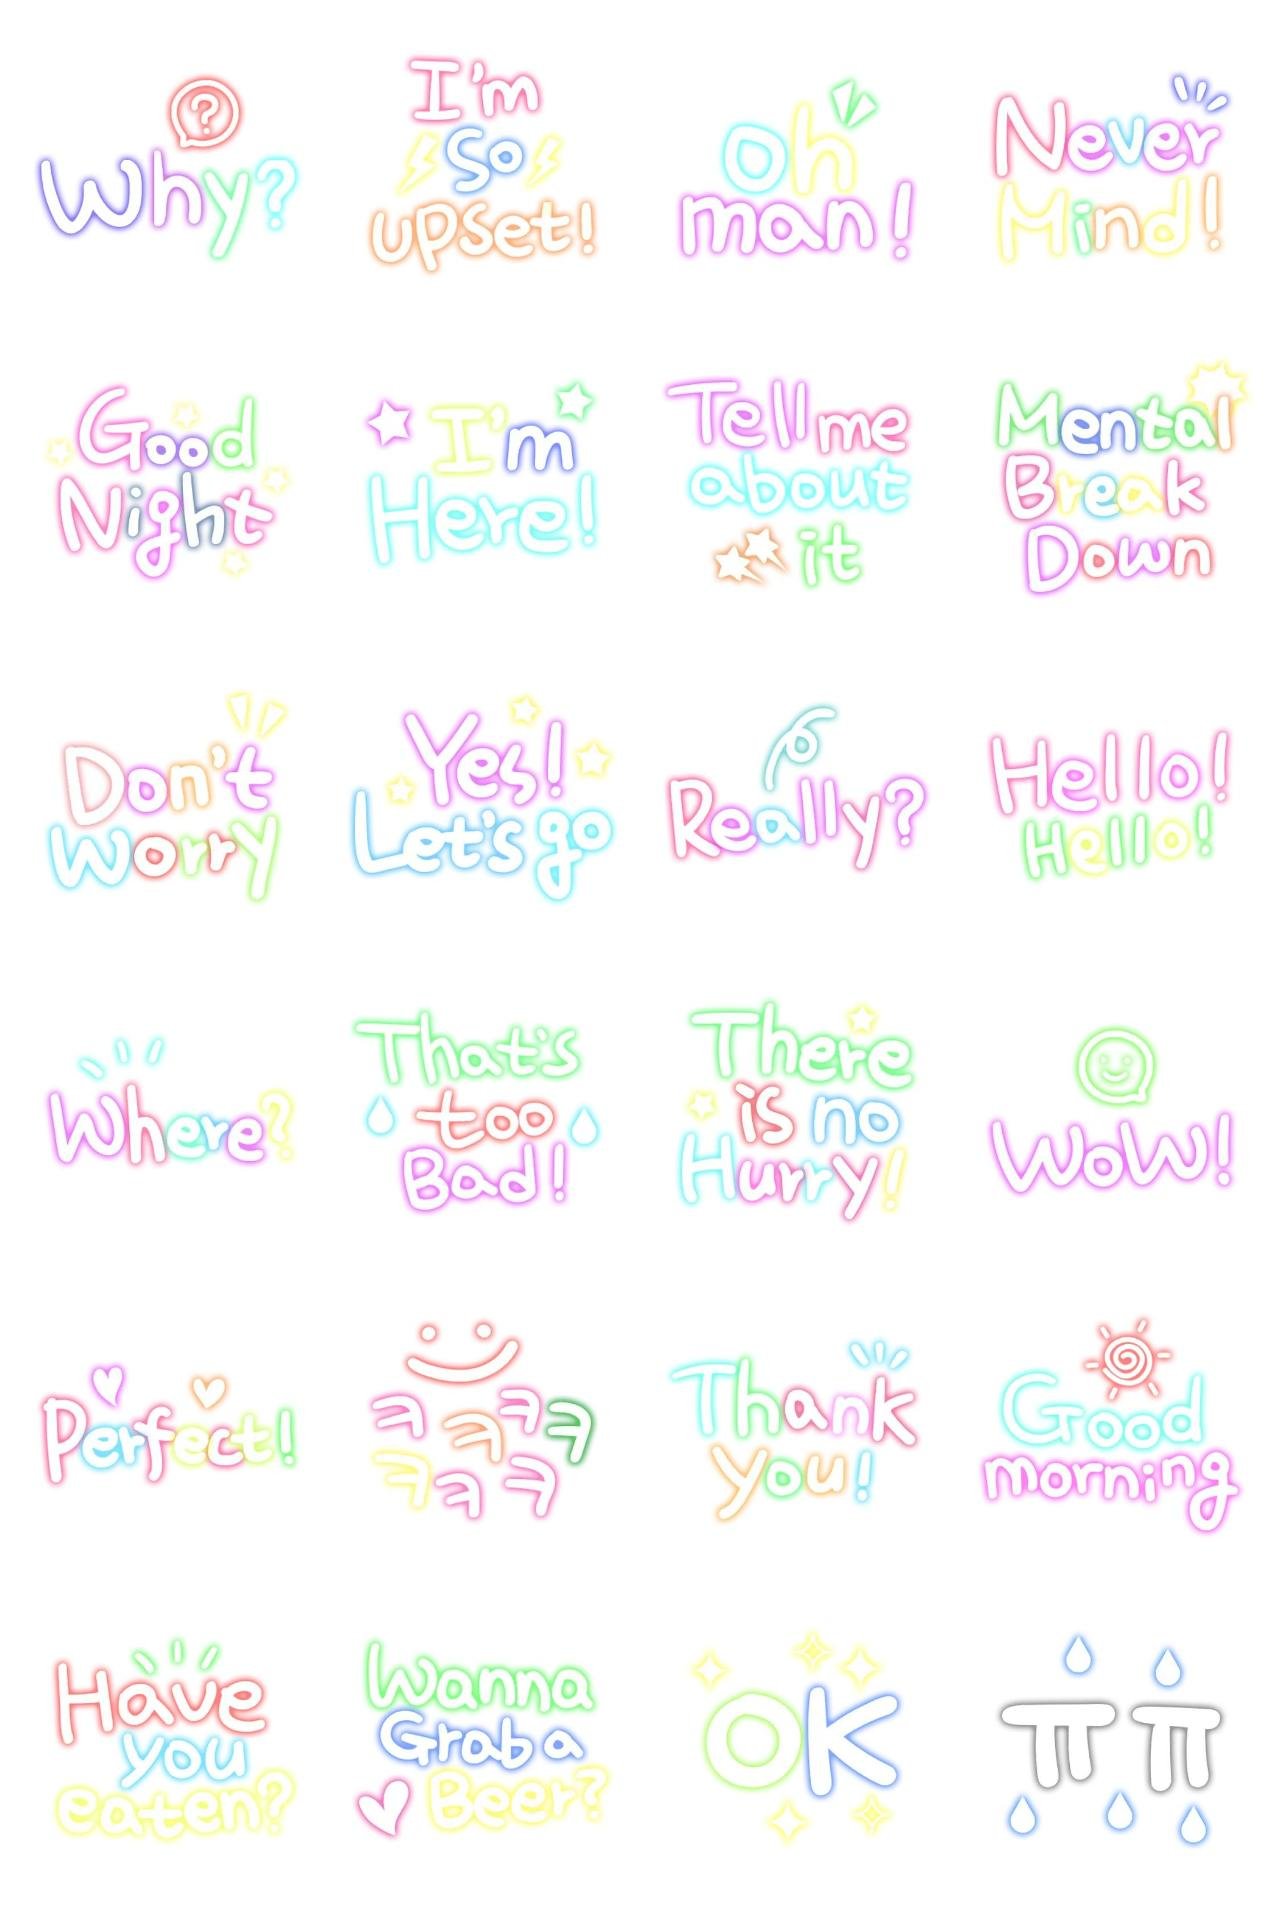 Bling Bling! Neonticon Phrases,Etc. sticker pack for Whatsapp, Telegram, Signal, and others chatting and message apps